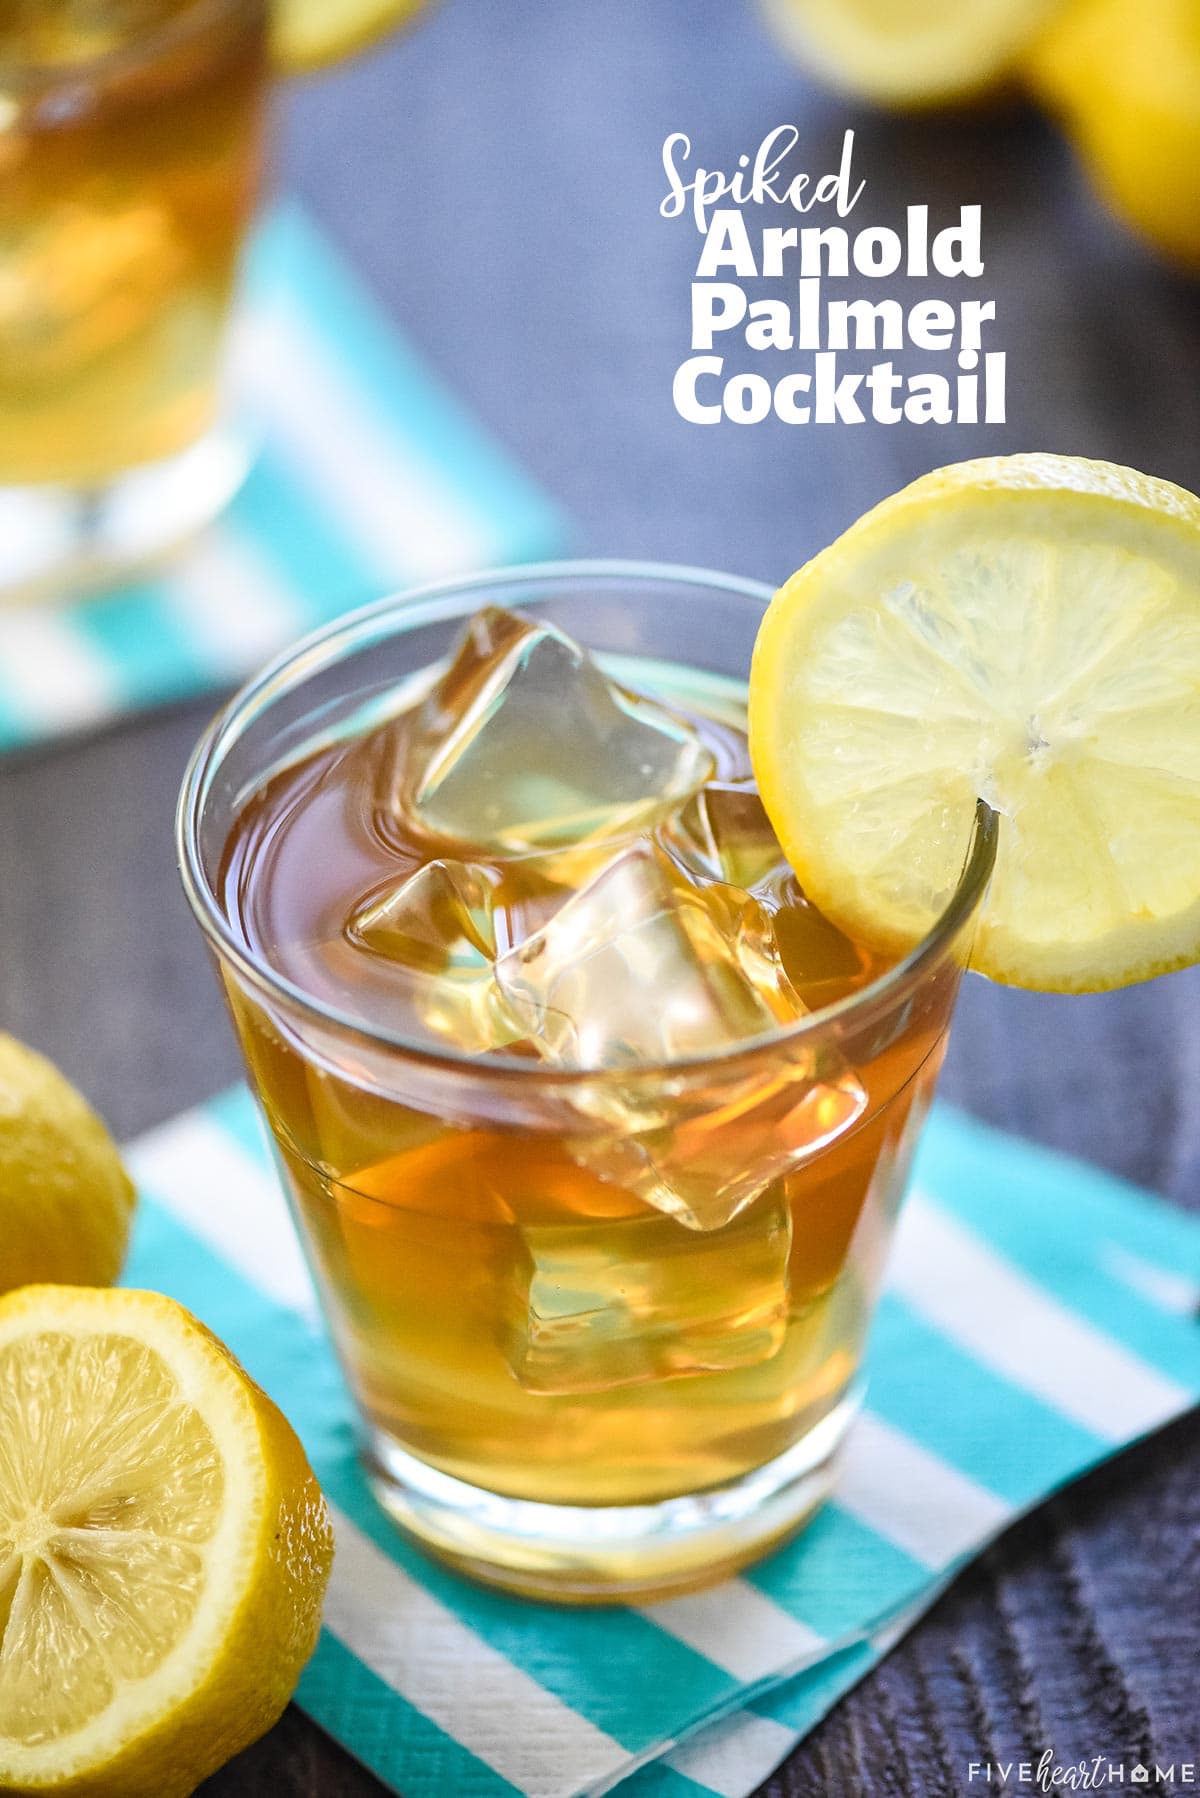 Spiked Arnold Palmer Drink alcohol (also known as a John Daly drink) with text overlay.